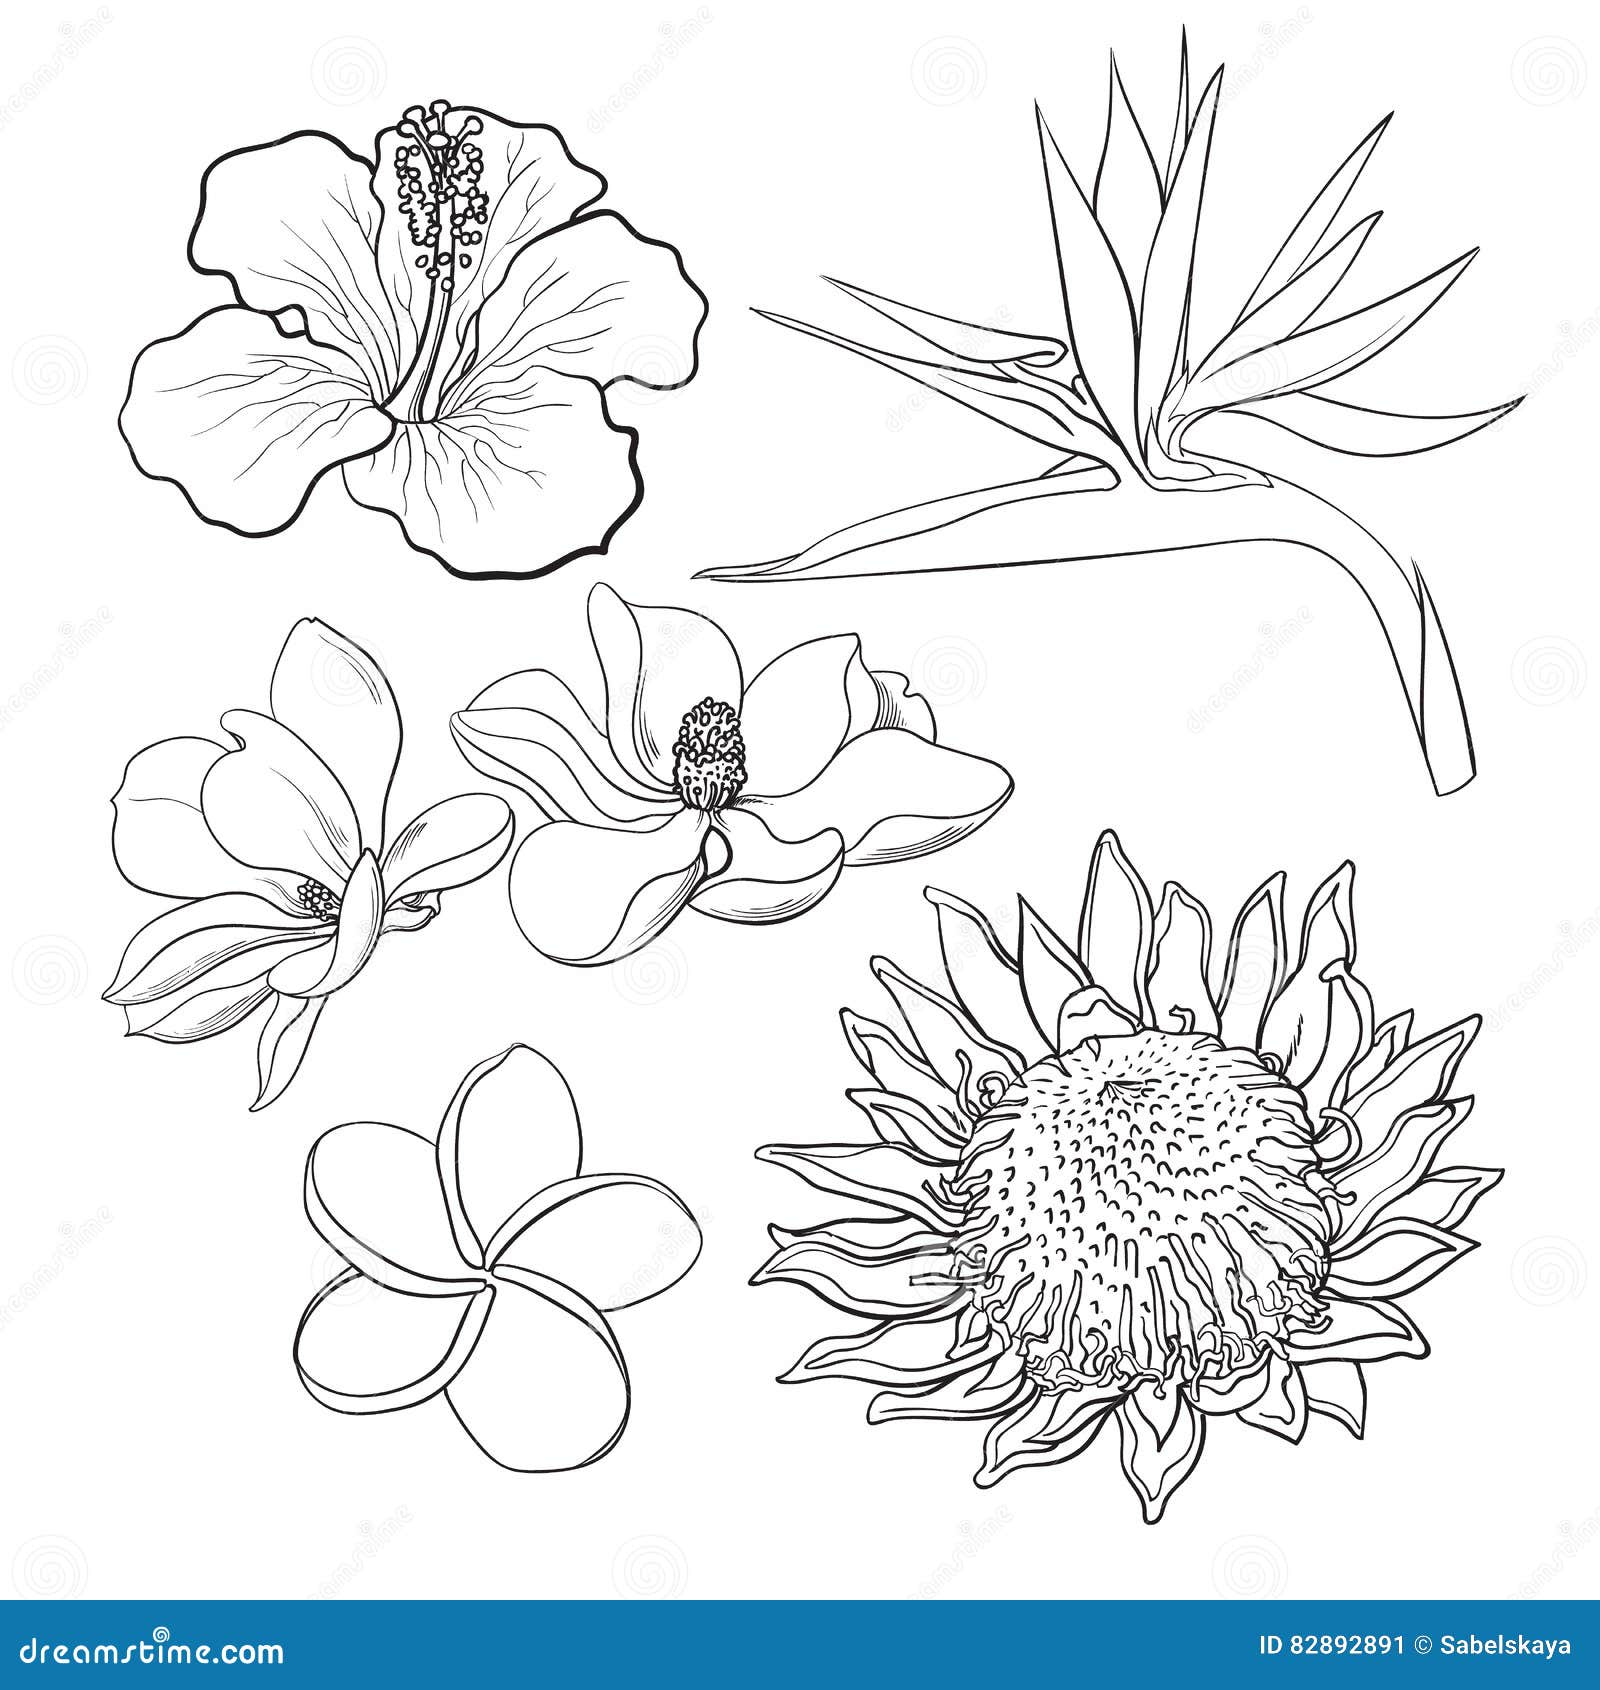 Tropical Flower Drawing Images  Free Download on Freepik